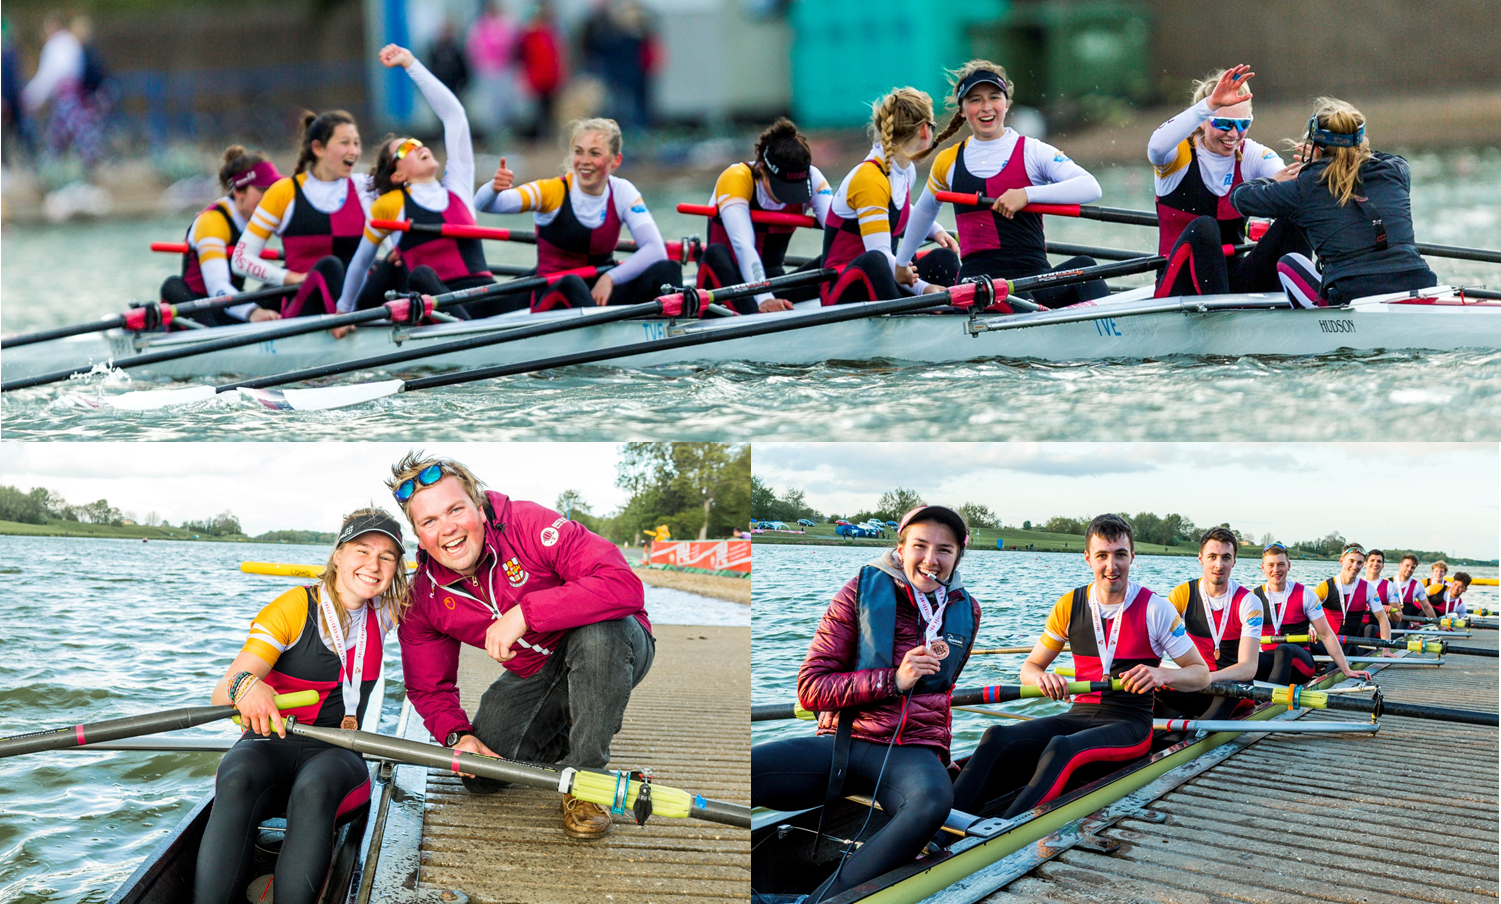 All smiles for Saturday's medalling crews.